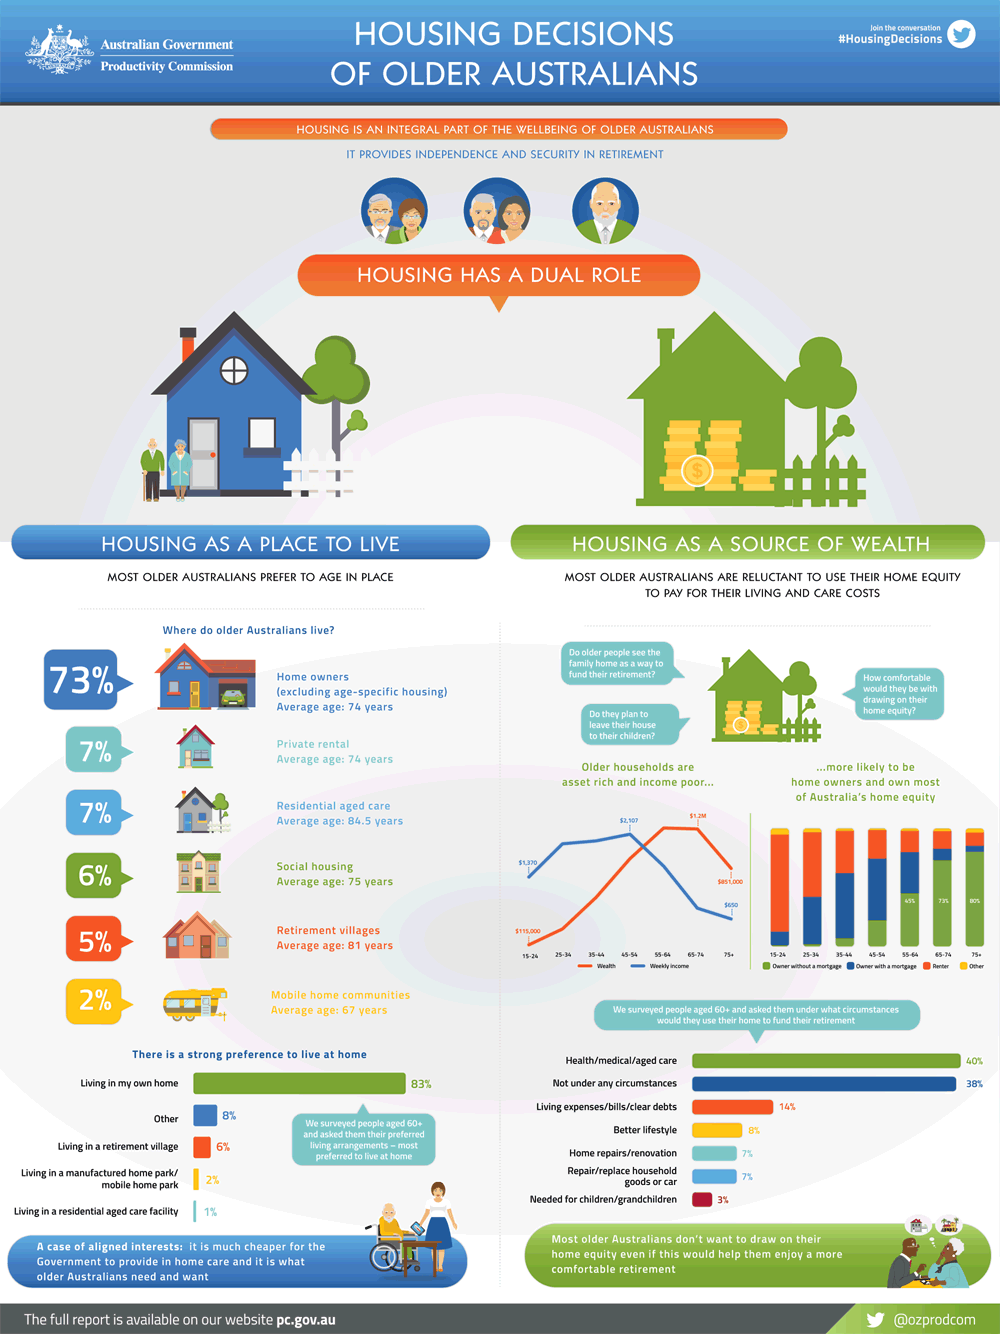 Housing Decisions of Older Australians infographic. Text version follows.